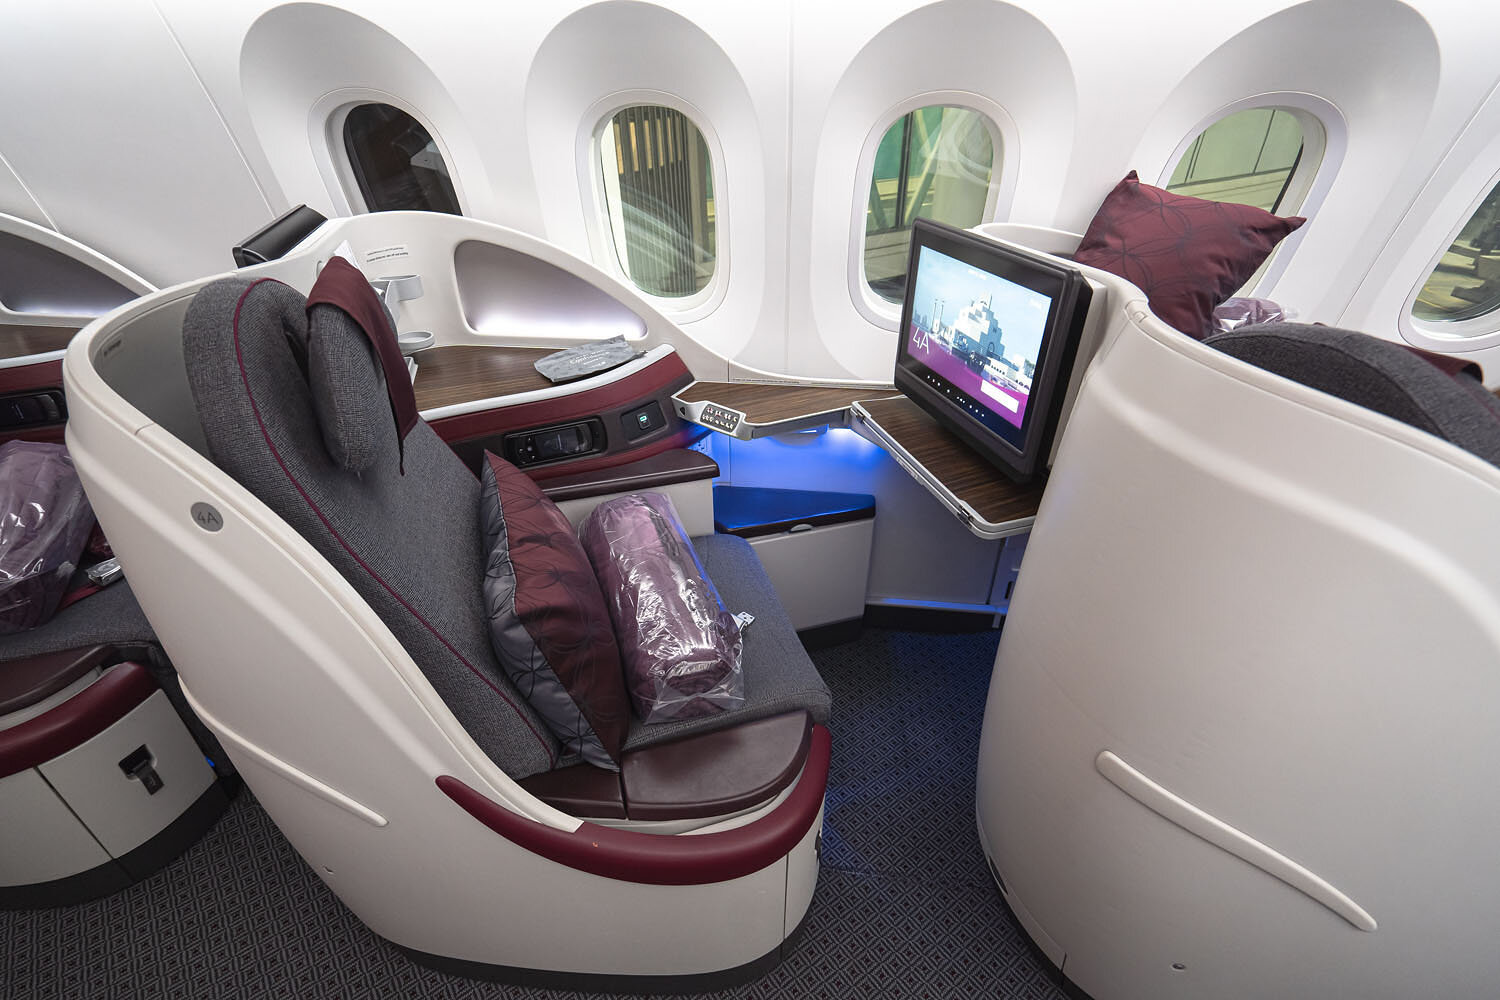 Qatar Airways' Business Class experience during the pandemic Suitesmile